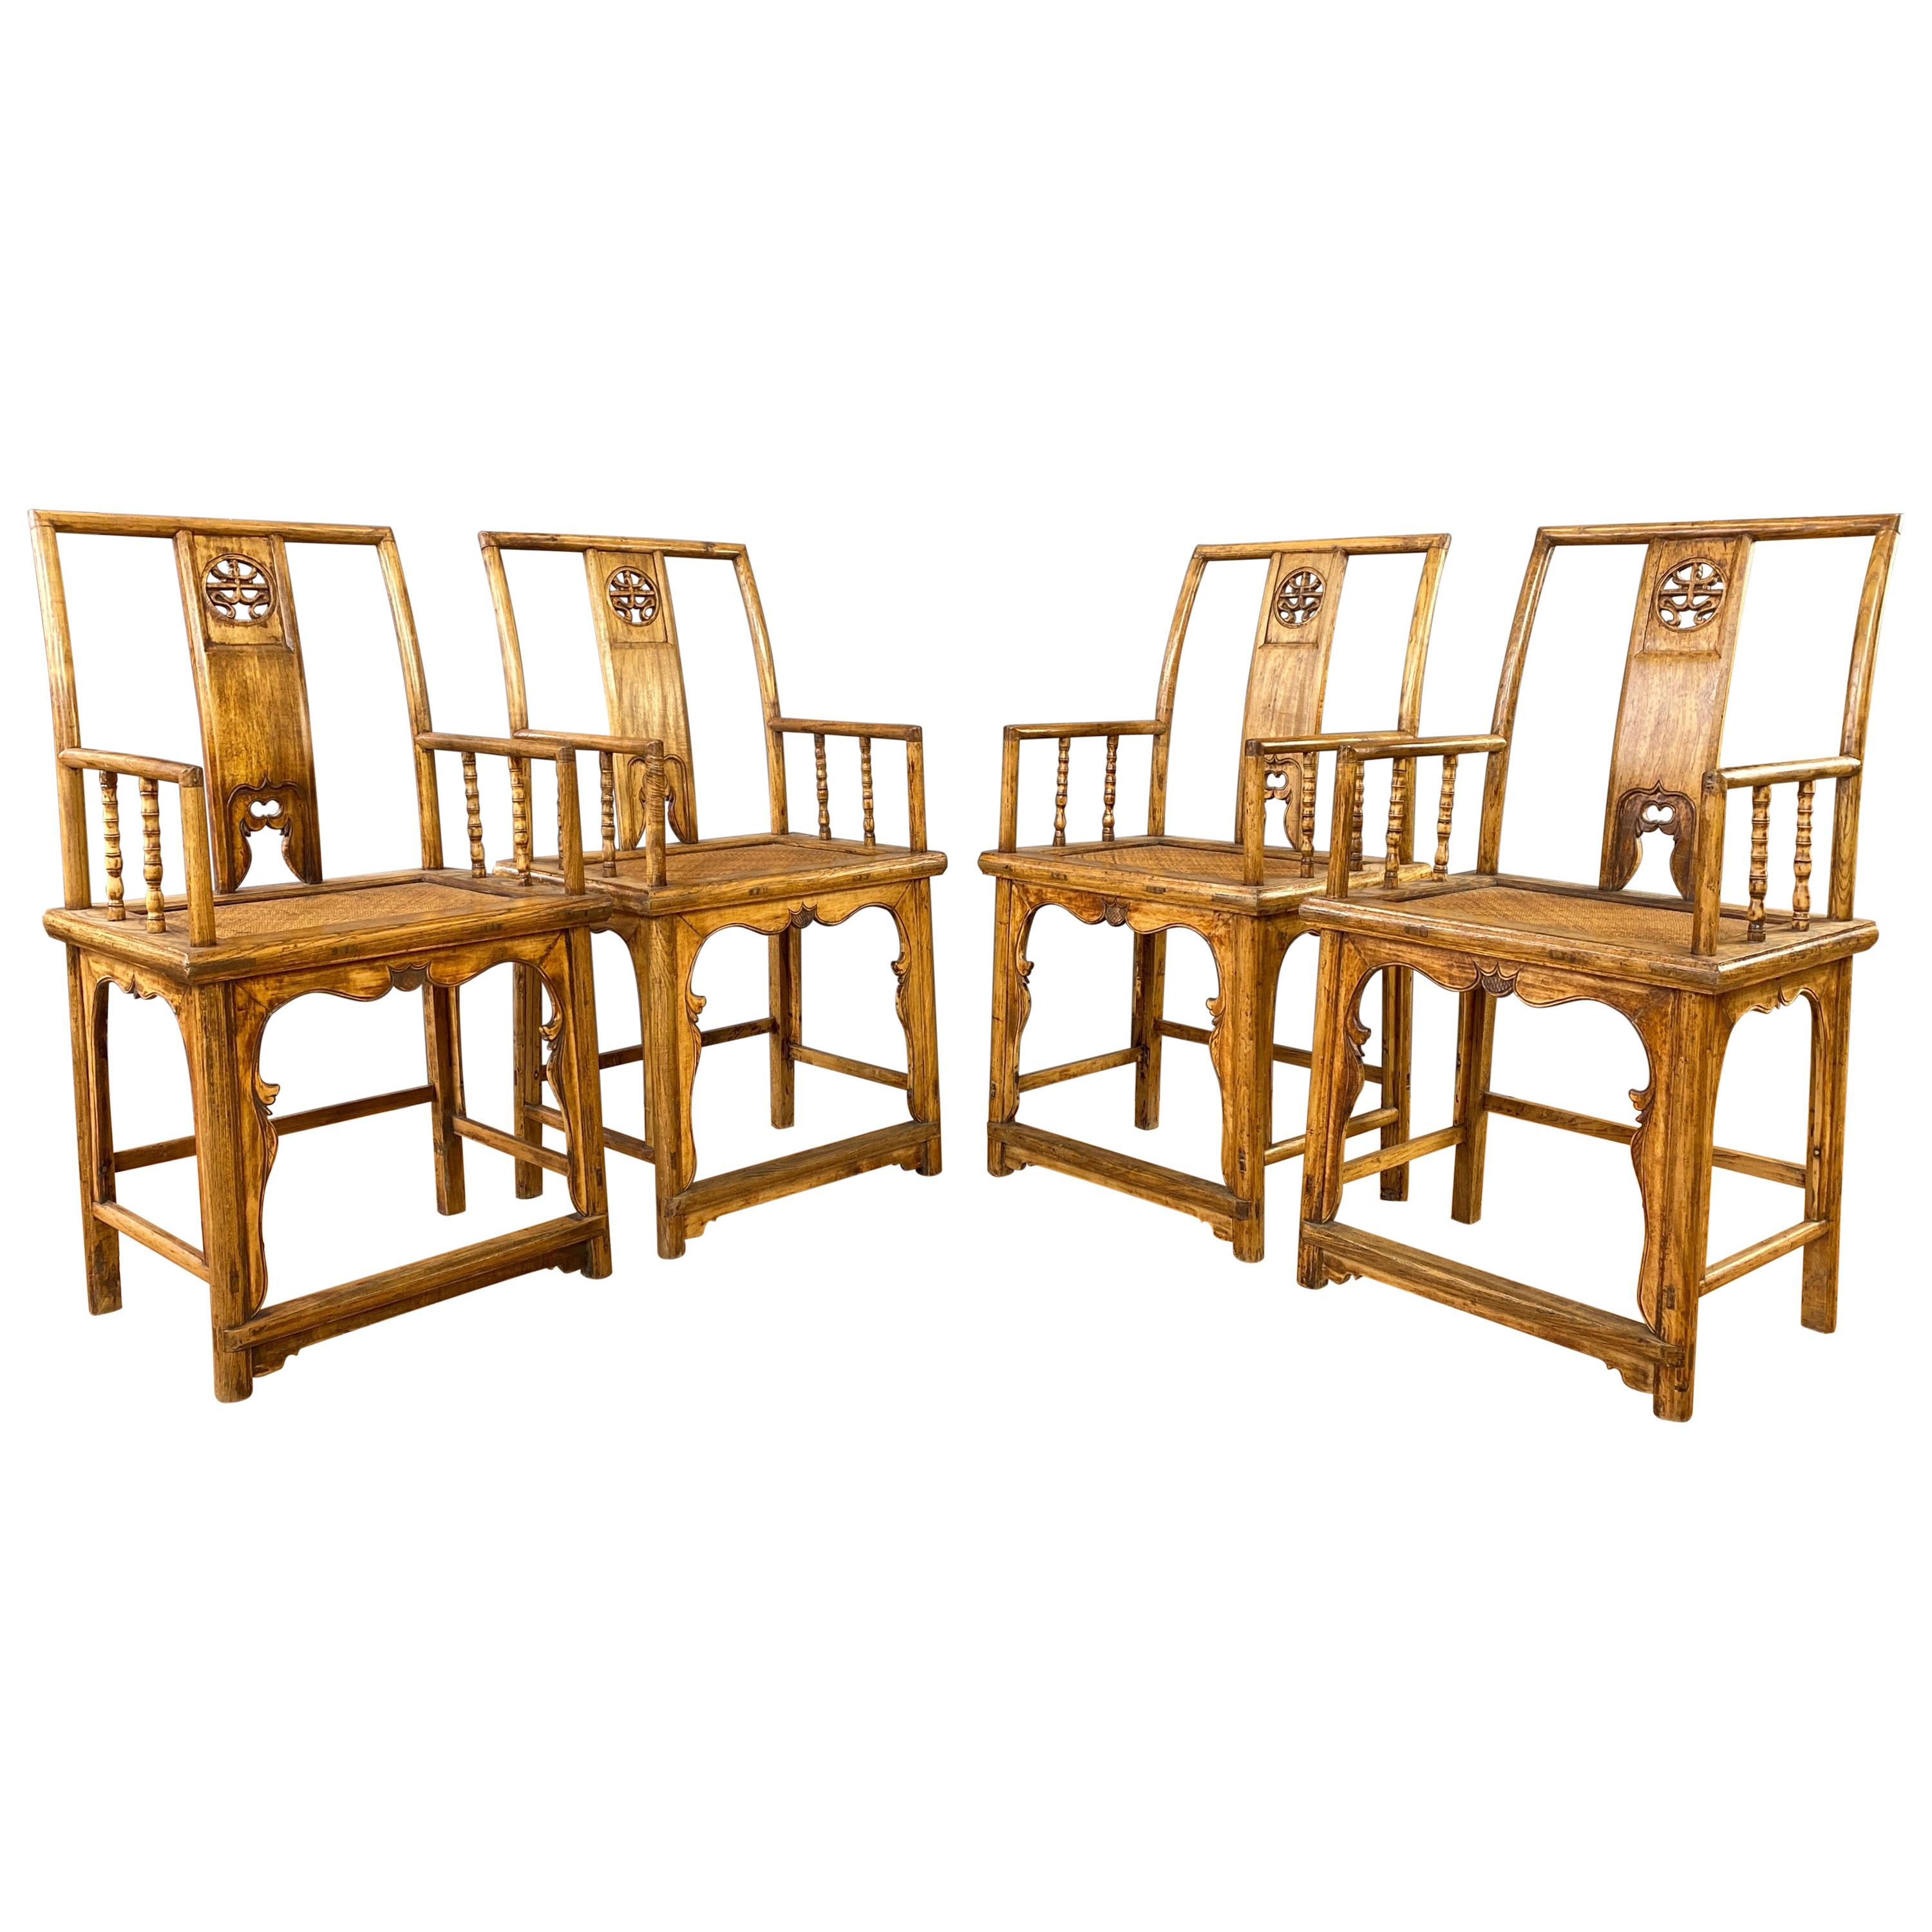 Set of Four Chinese Southern Official’s Hat Elm & Rattan Armchairs, c. 1900